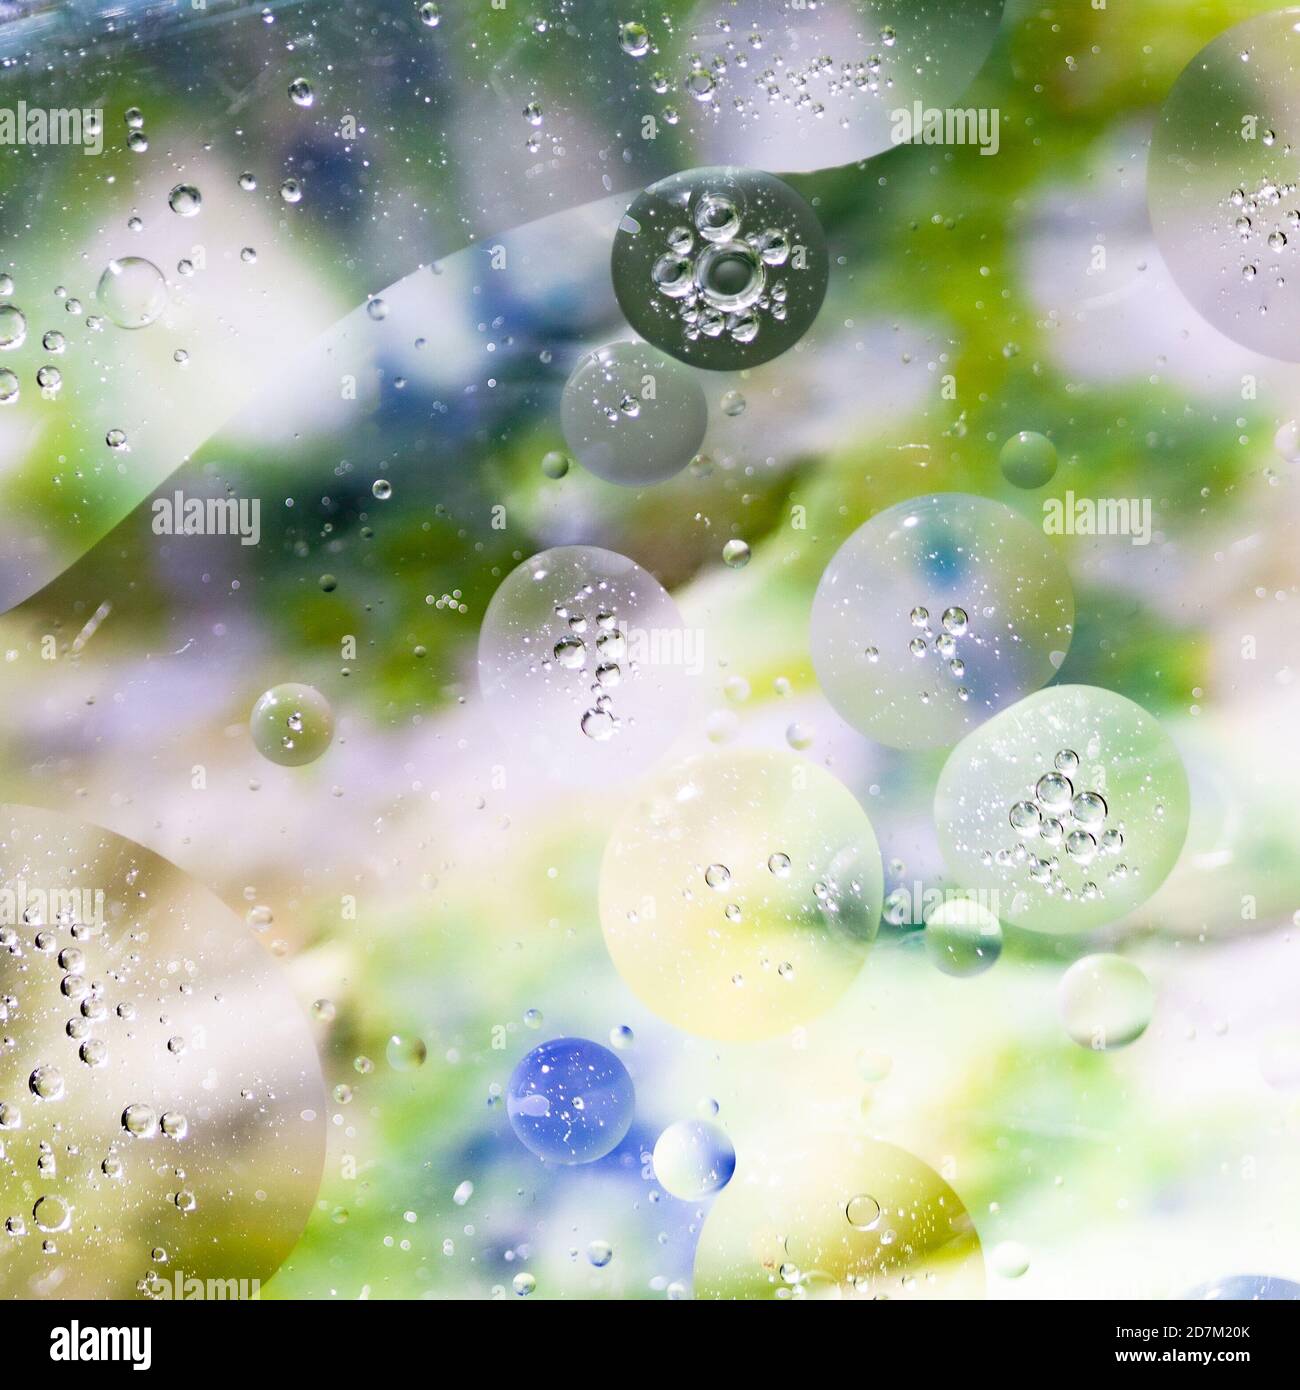 Texture of oil and water mixing over a blurred background to form circles and bubbles Stock Photo